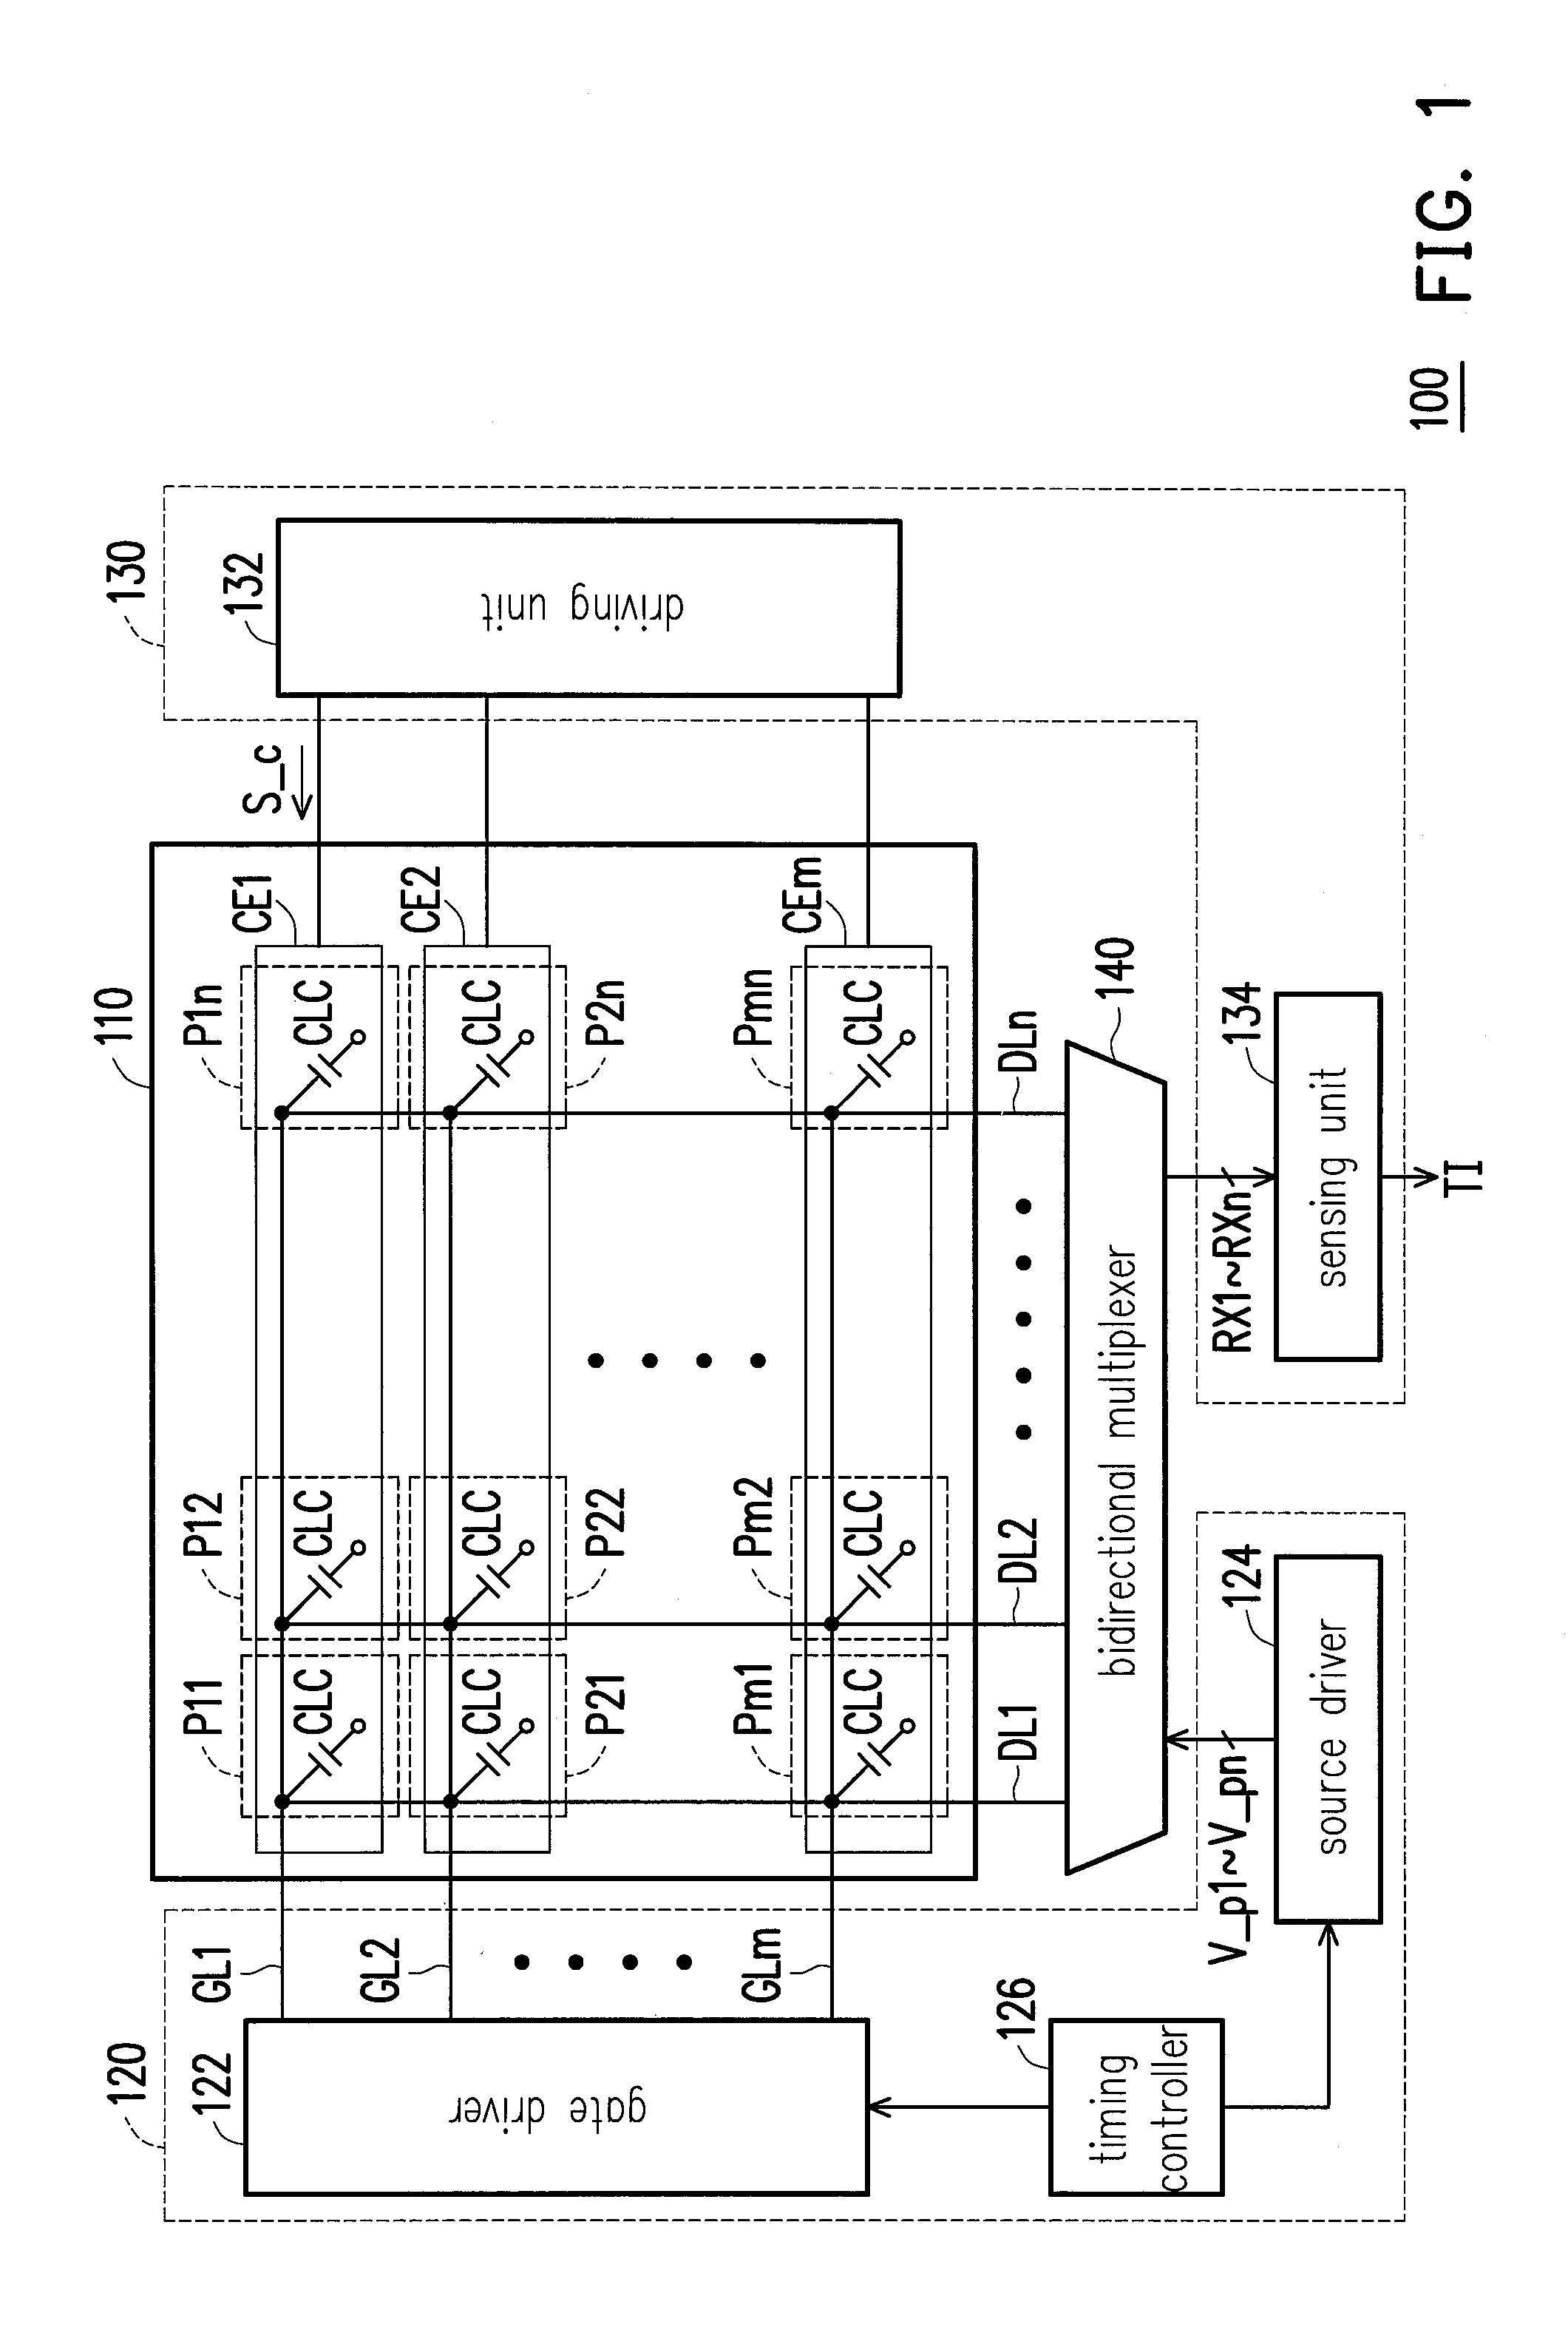 Display apparatus with touch sensing function